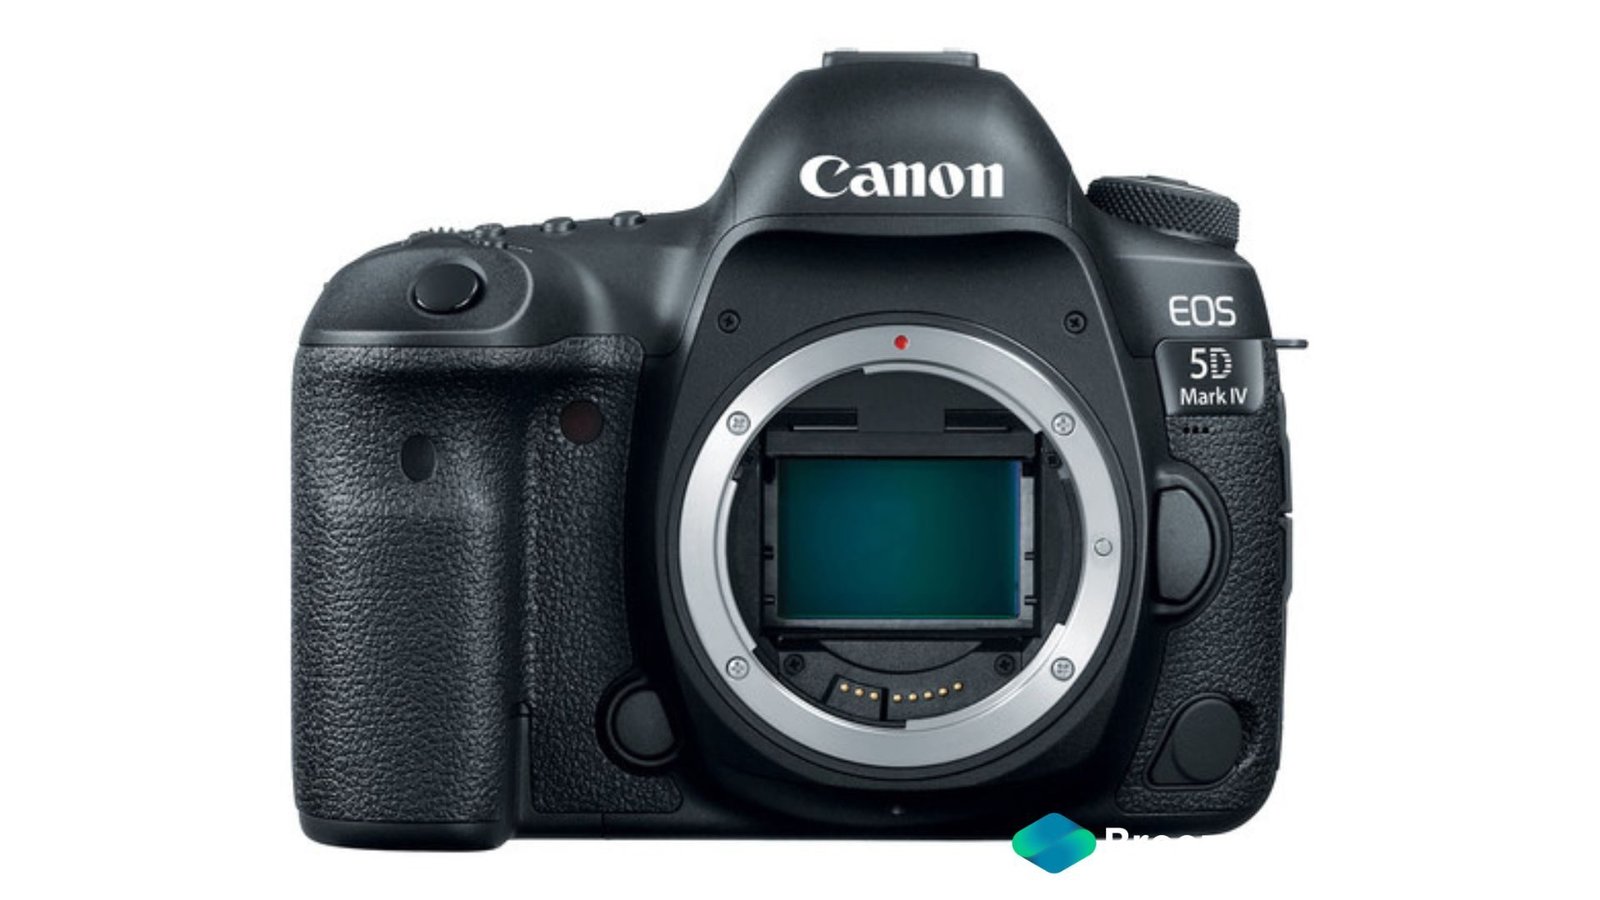 Rent Canon EOS 5D Mark IV Camera Body Lenses Kit in Delhi NCR, Camera accessories, Camera lenses for rent, in Delhi Gurgaon Noida, hire Shooting equipment, Lighting equipment rental, Film gear rental for Video production, camera rental company in Delhi, film equipment rental company